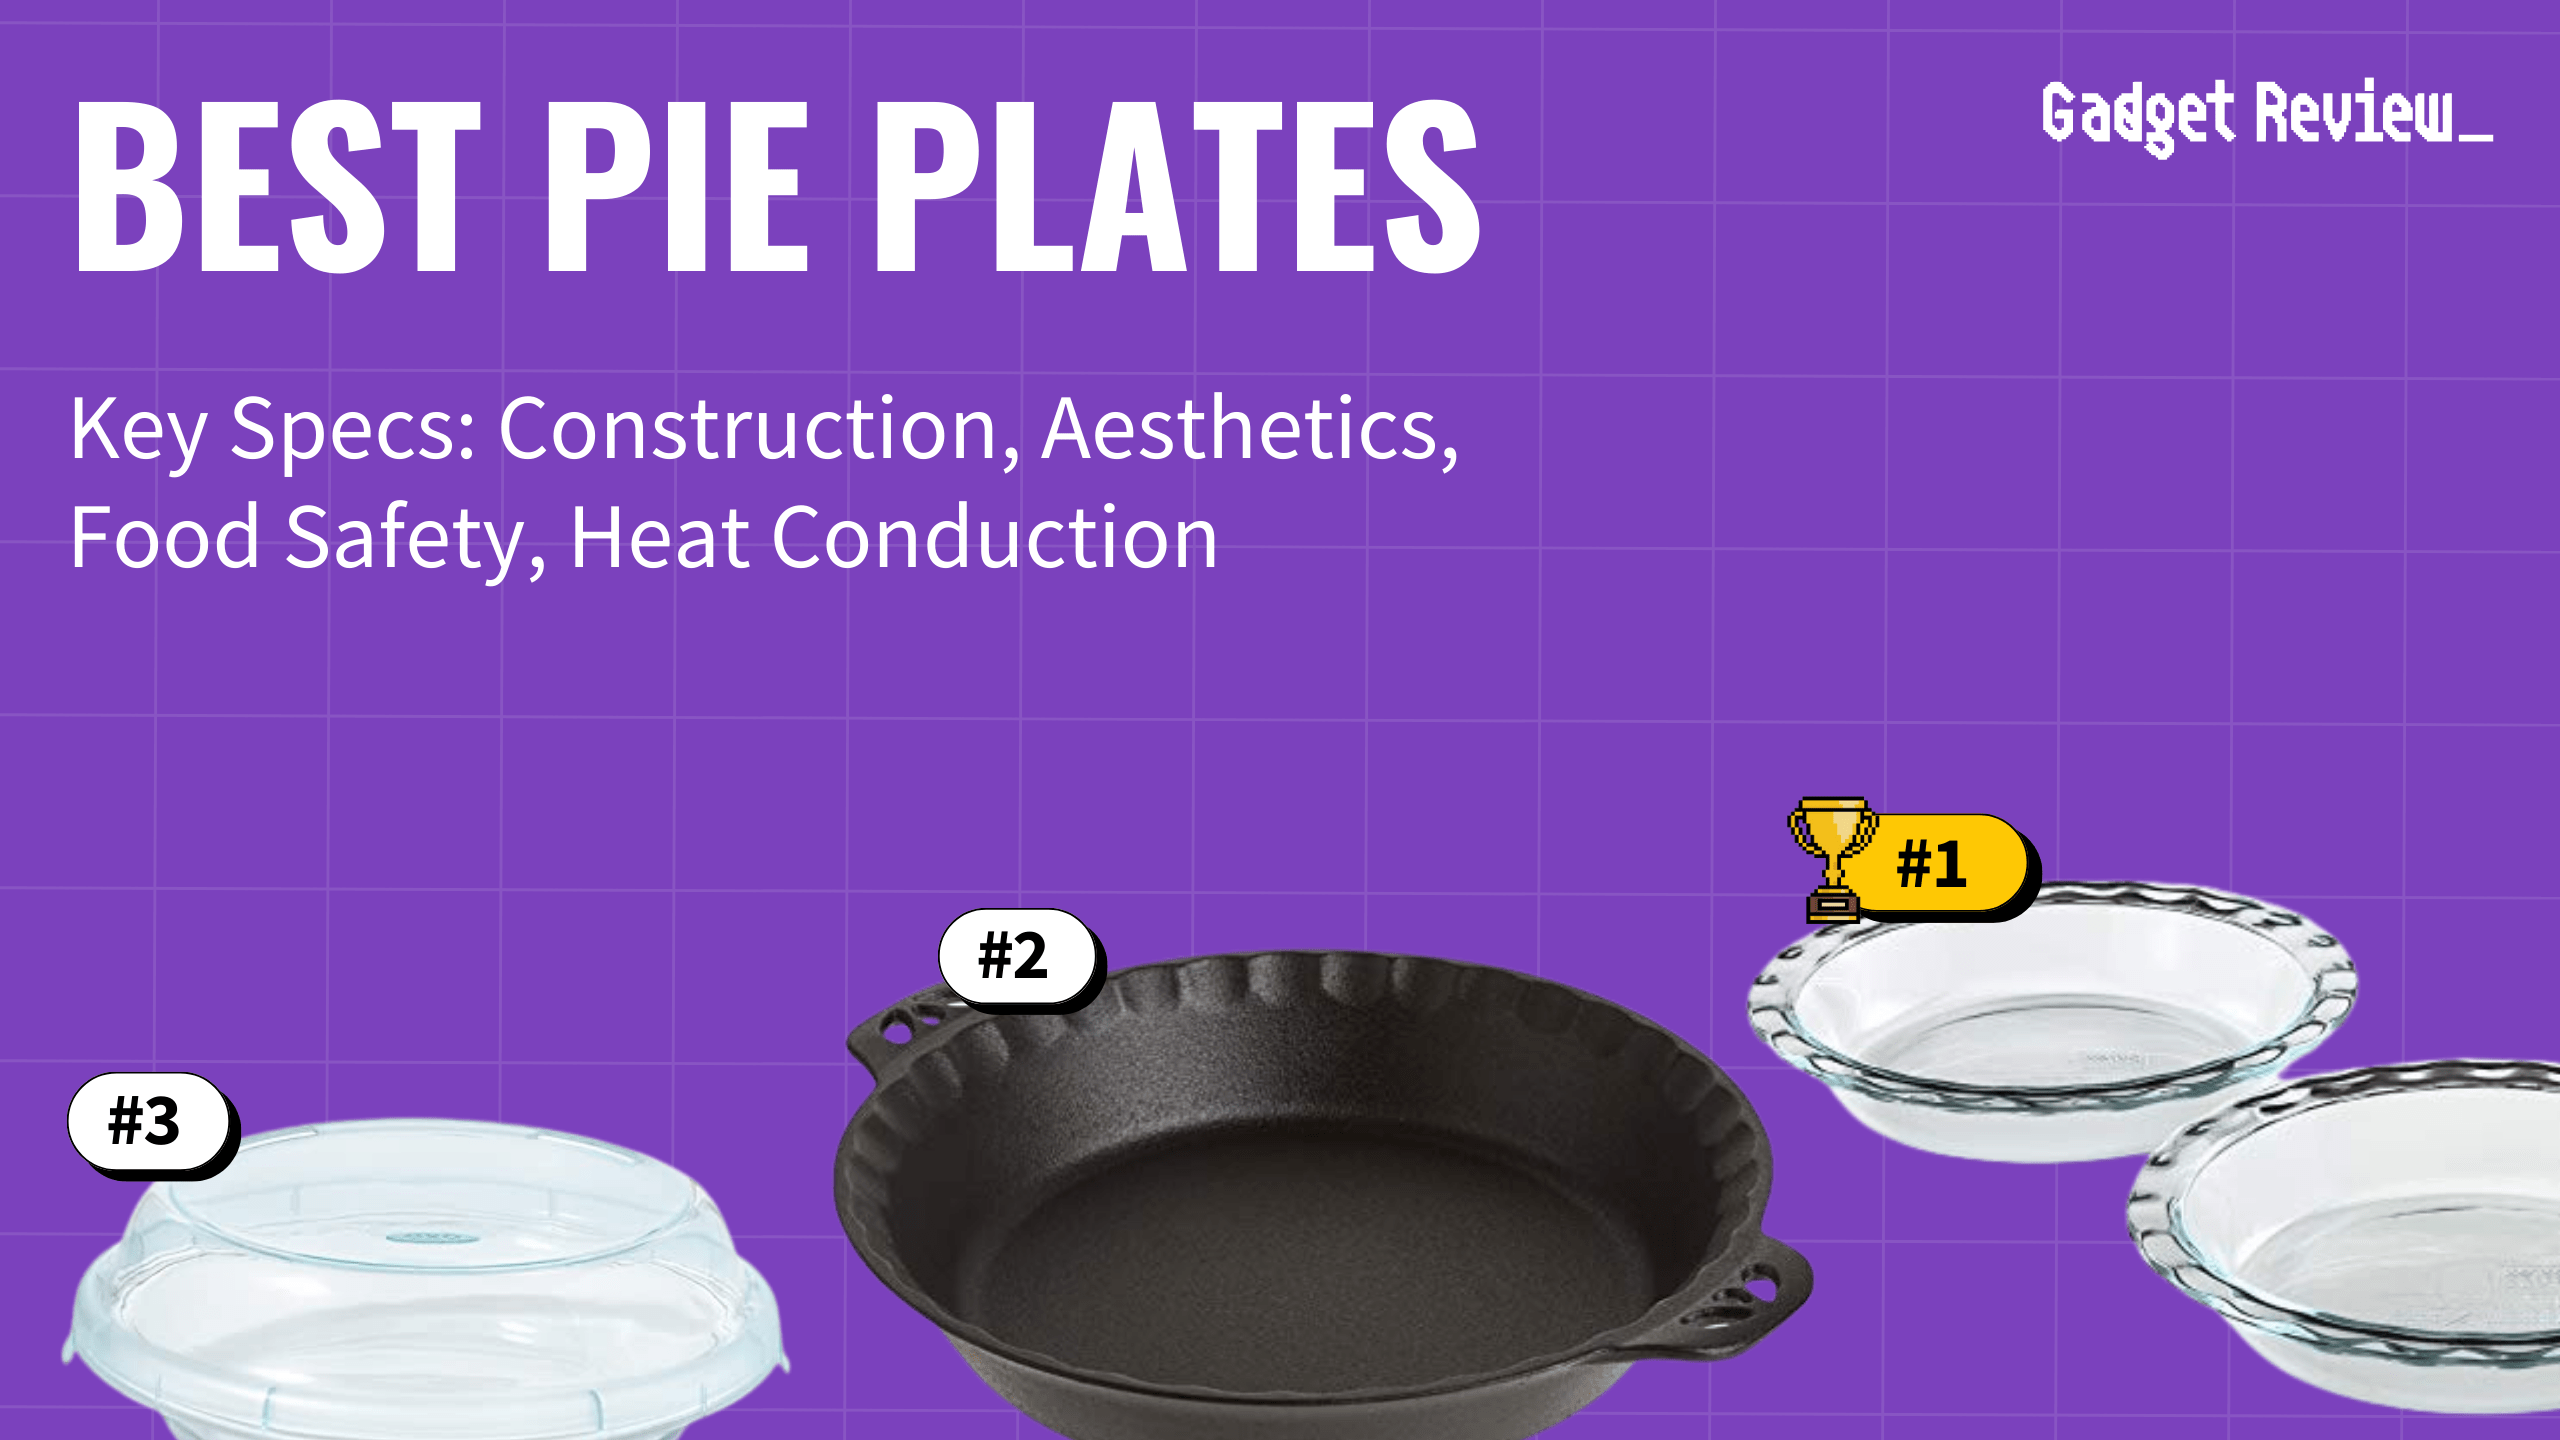 best pie plates featured image that shows the top three best kitchen product models